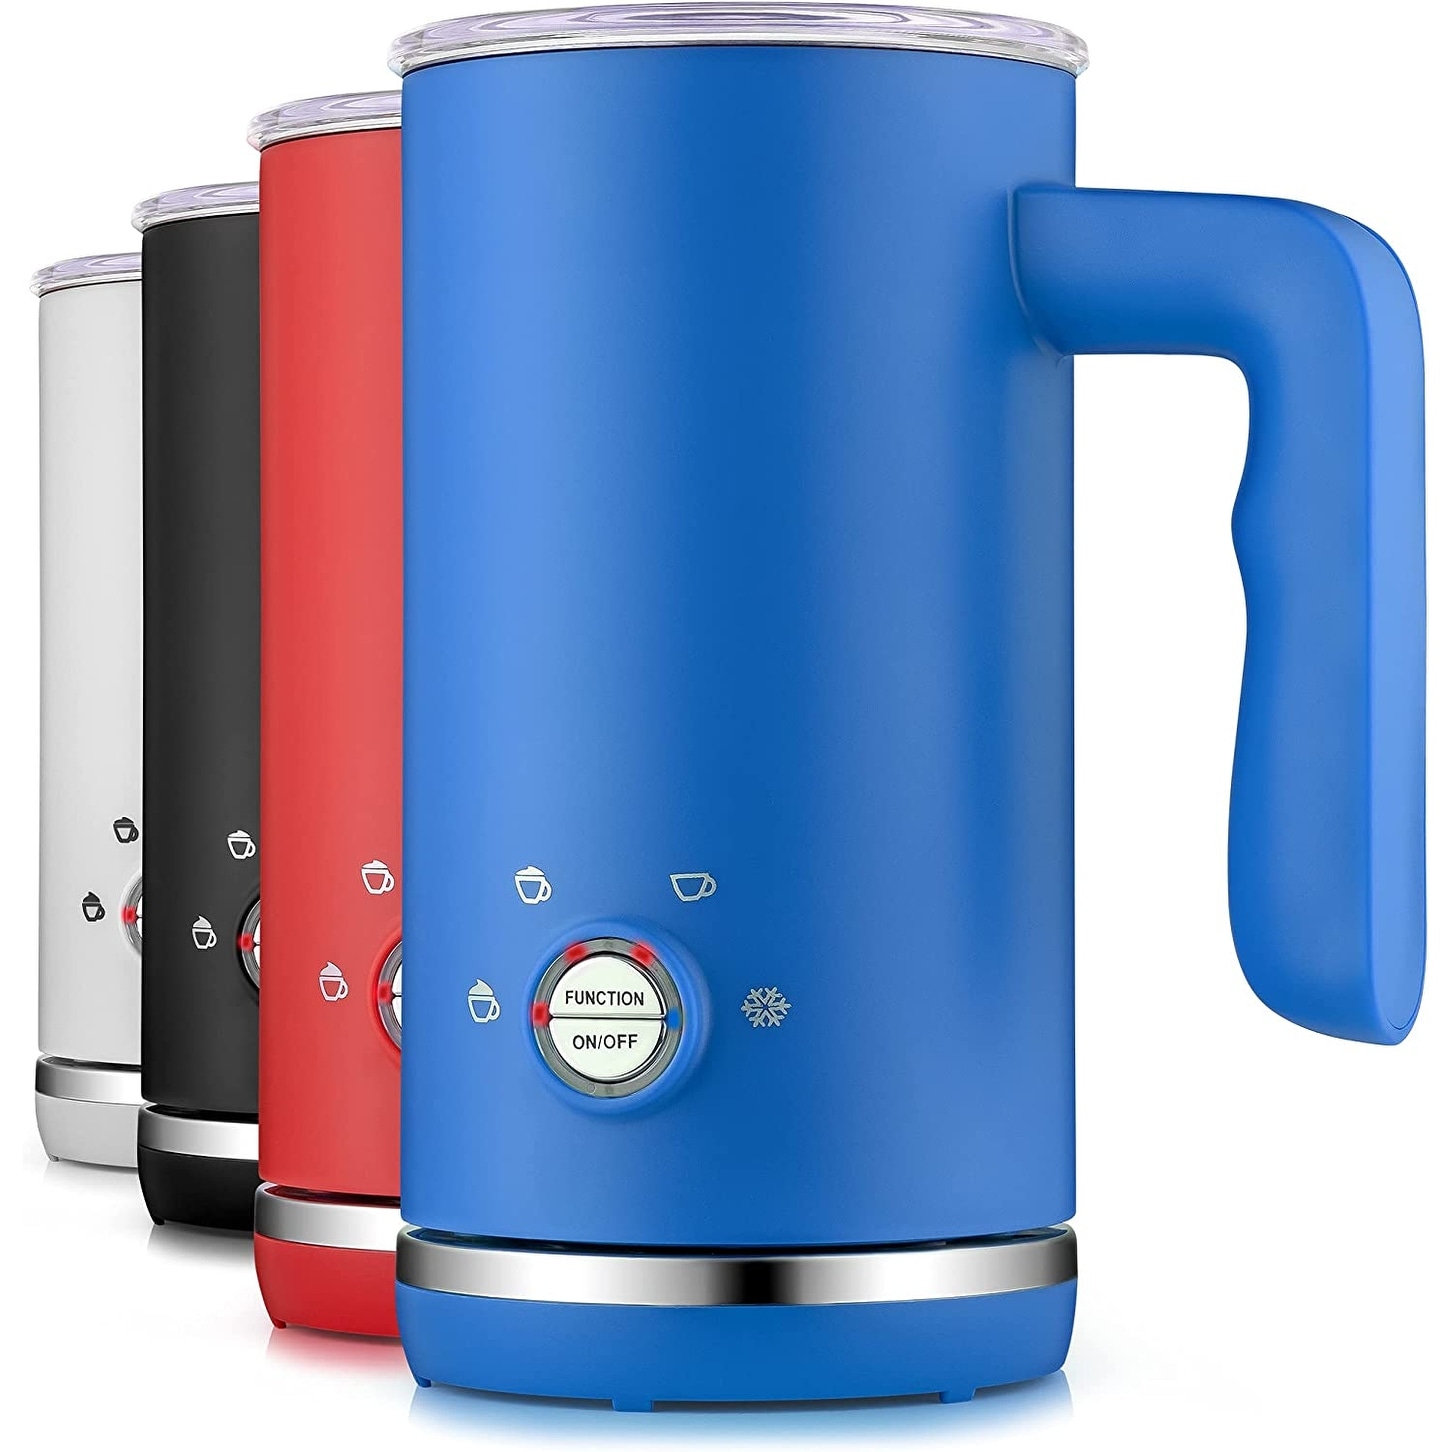 https://ak1.ostkcdn.com/images/products/is/images/direct/3f28cf0a4bcc7e54fbbb2c09870e0d7ee7aeb7d4/Zulay-Kitchen-Milk-Frother-and-Heater---Blue.jpg